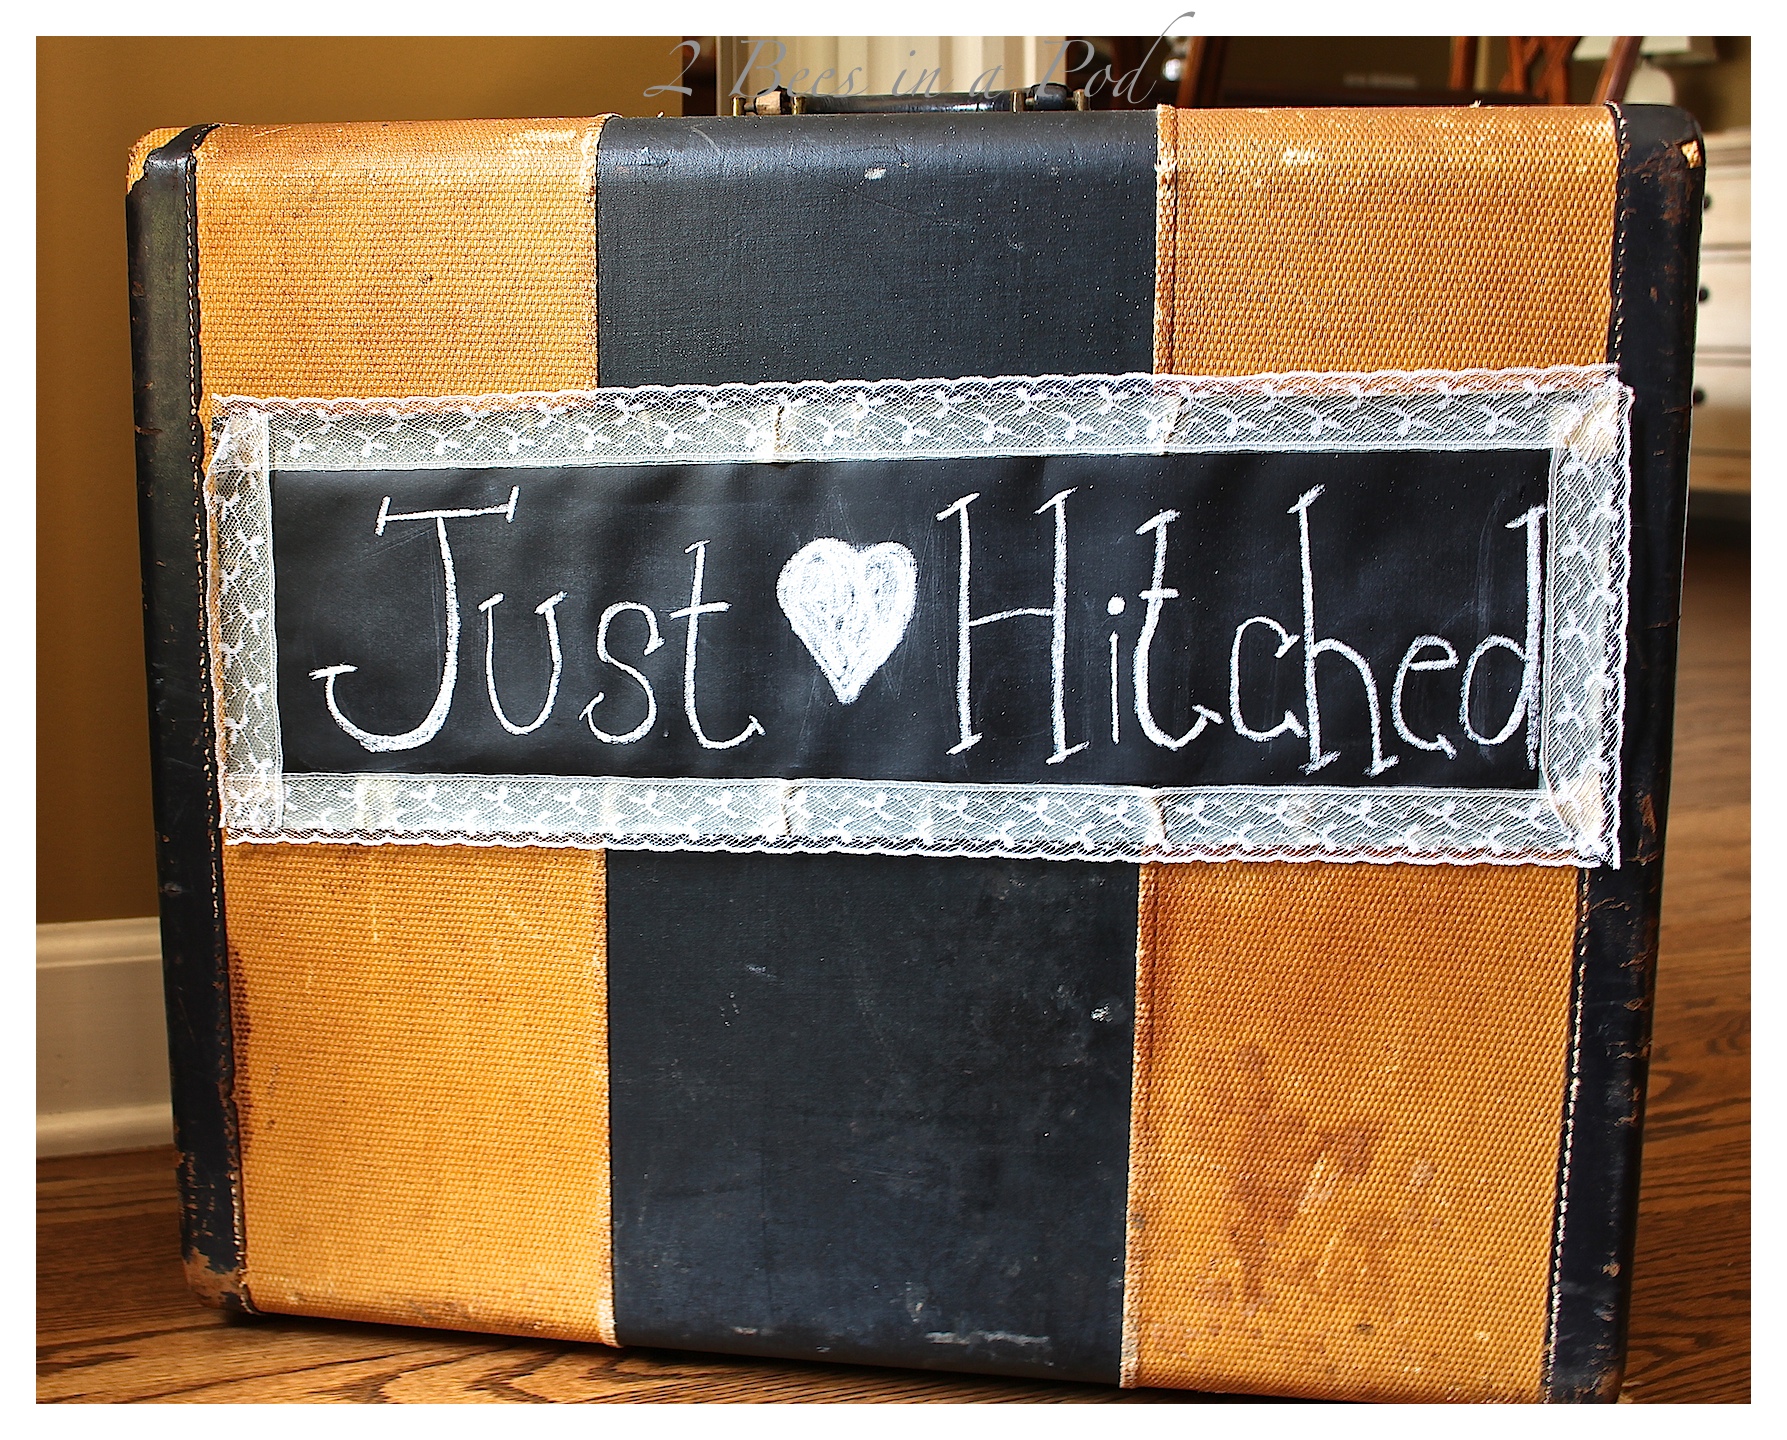 Decorating with vintage suitcases